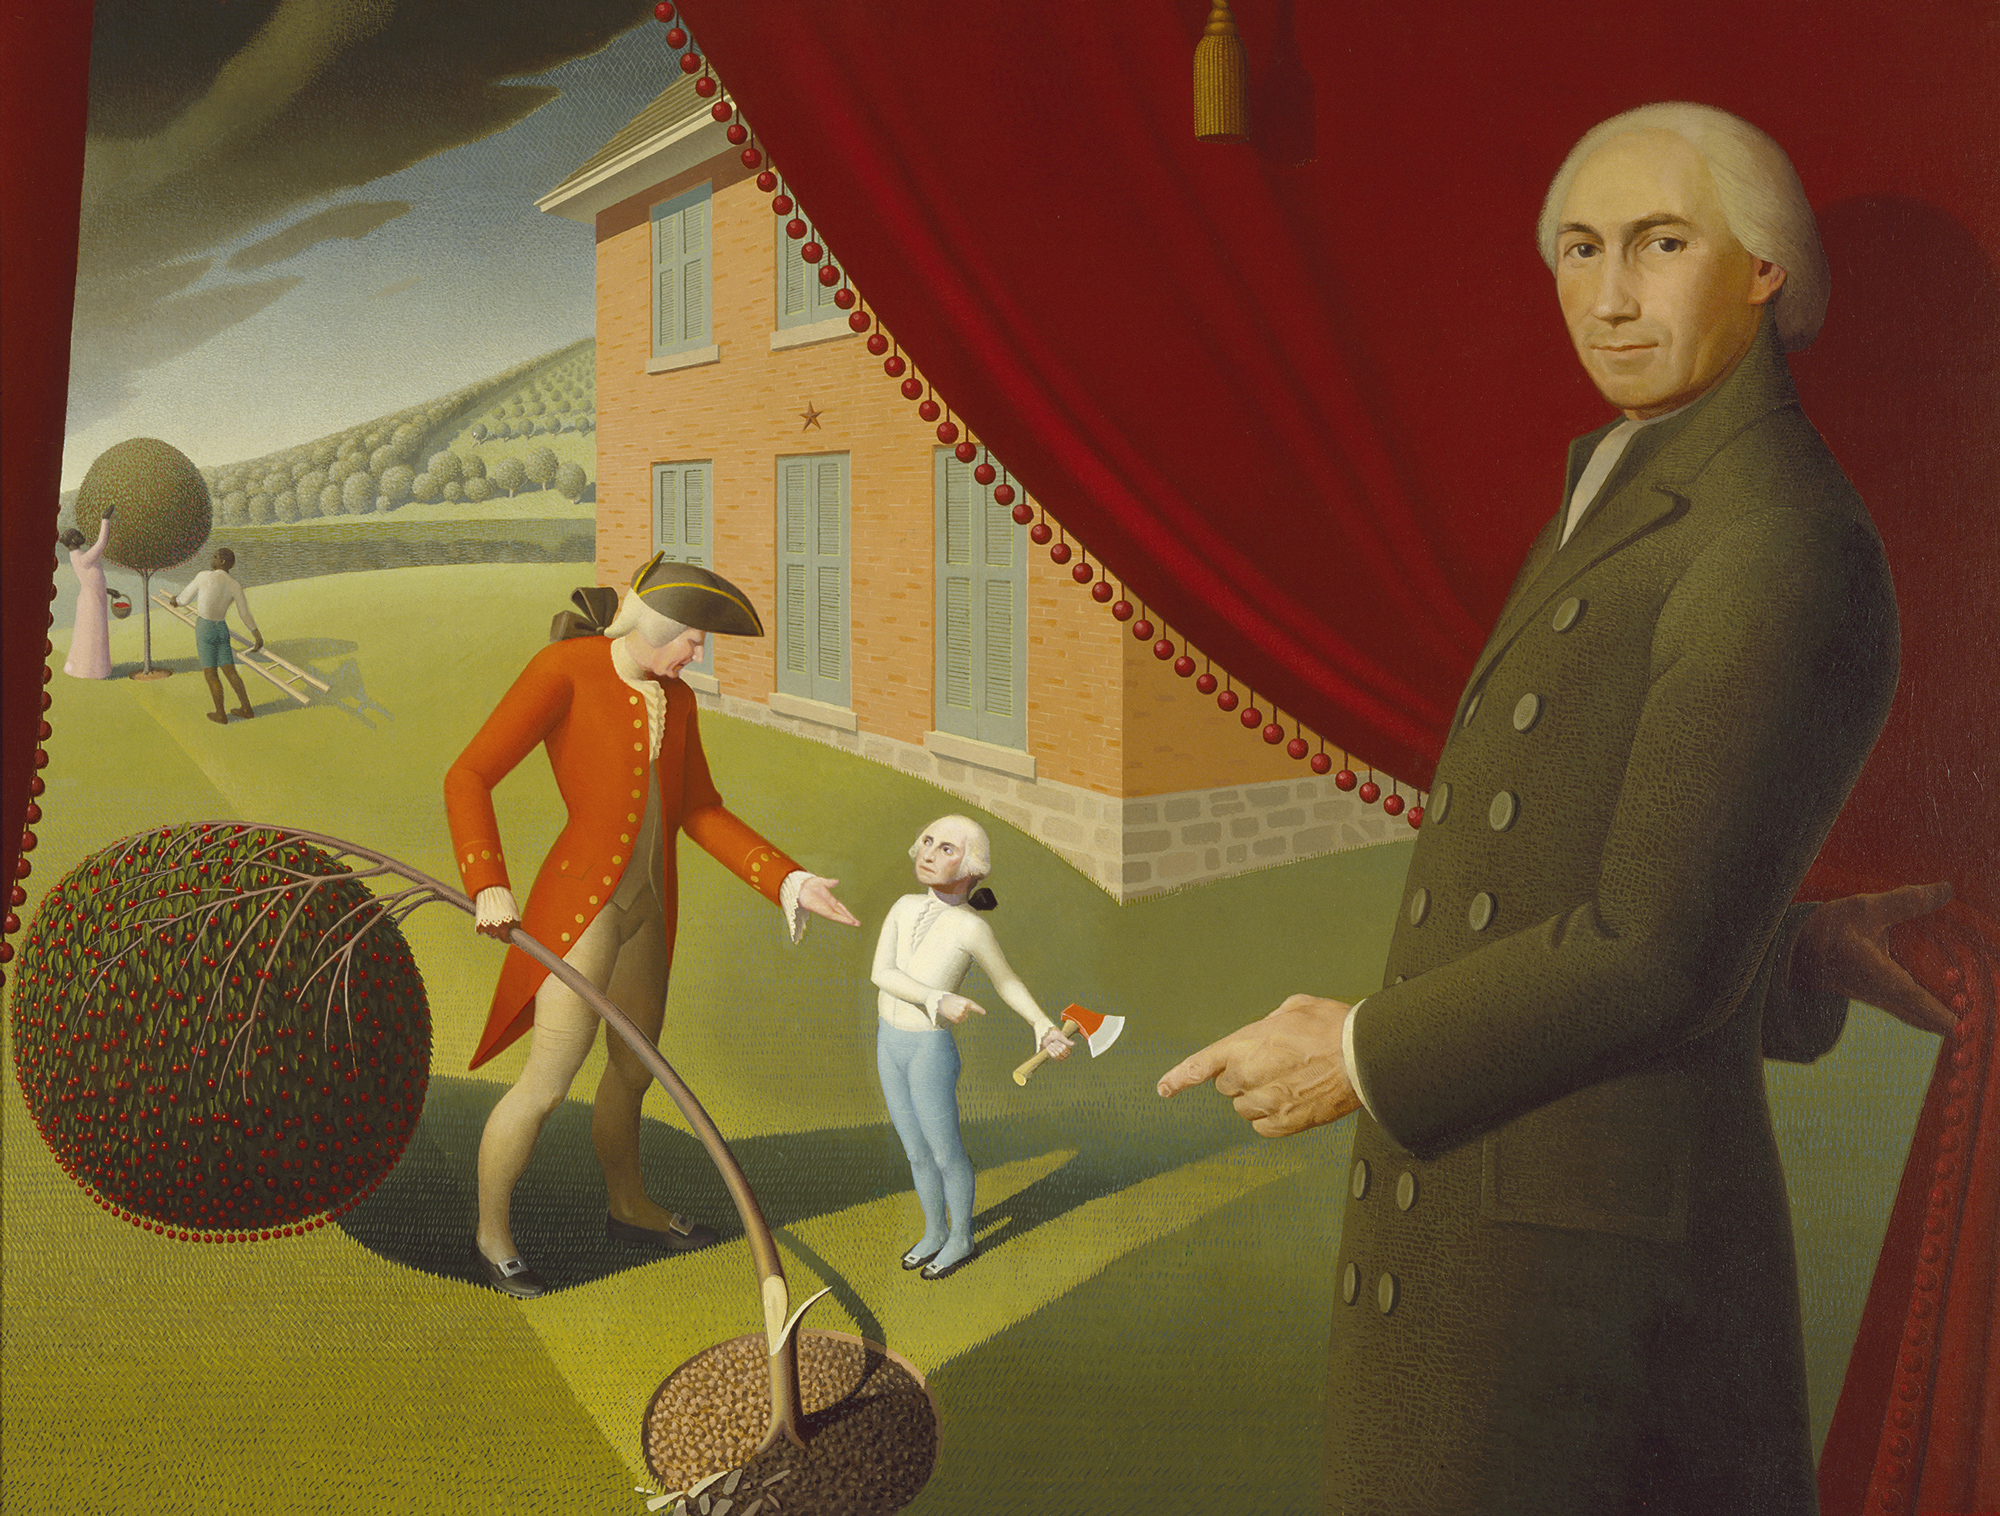 Lincoln was inspired as a young man by Parson Weems' biography of George Washington. The book was depicted in the painting "Parson Weem's Fable" in the Amon Carter Museum of American Art.